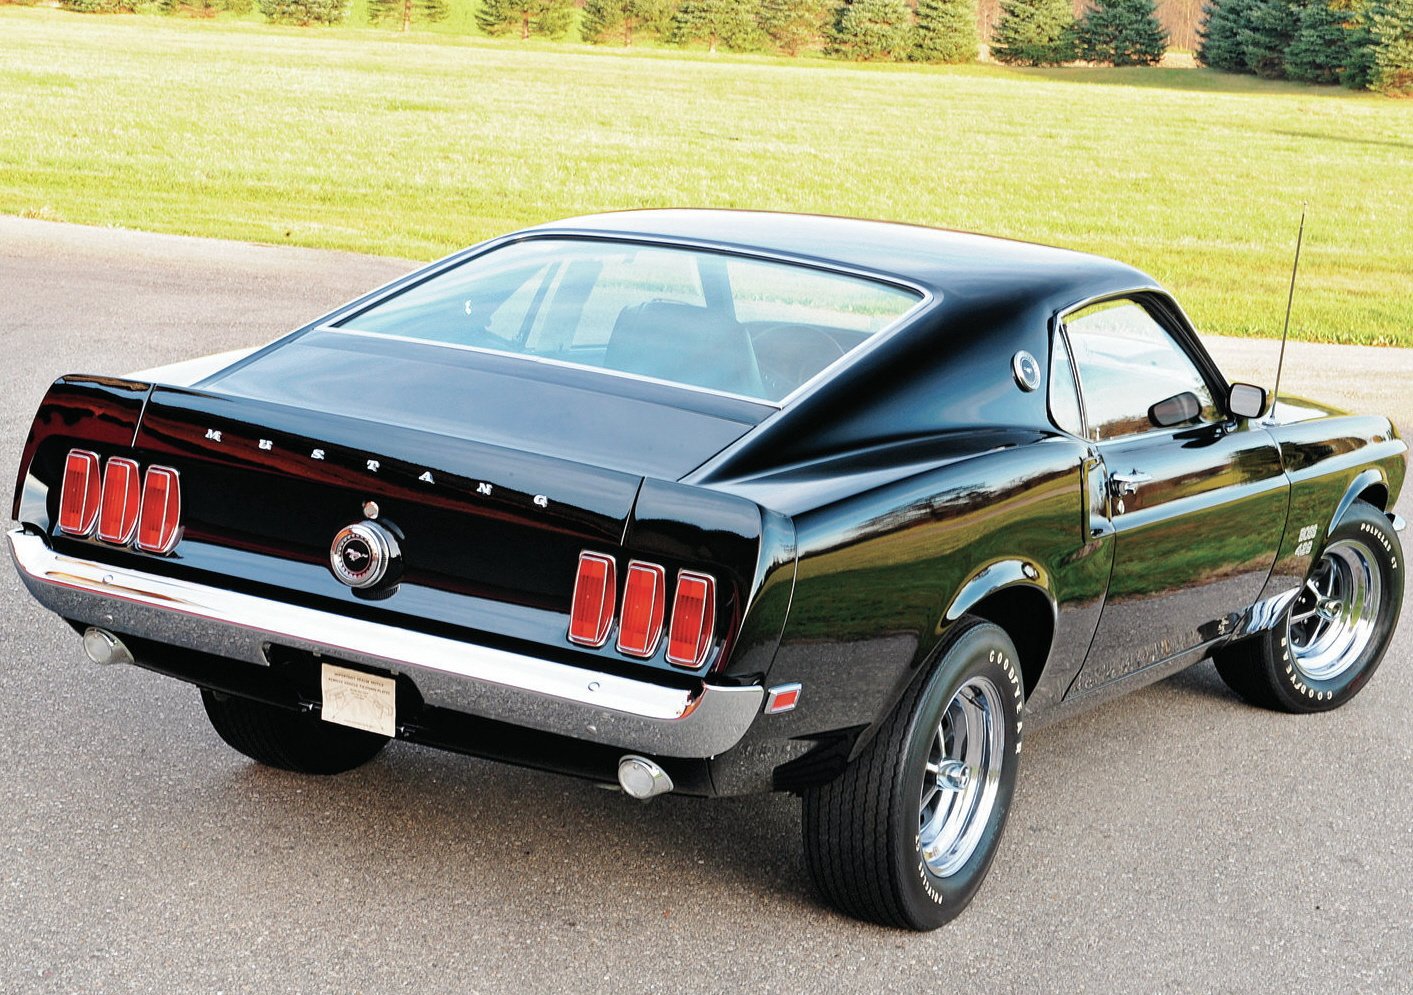  429 for sale wallpaper 429 Boss Mustang For Sale Viewing Gallery pict 1413x995